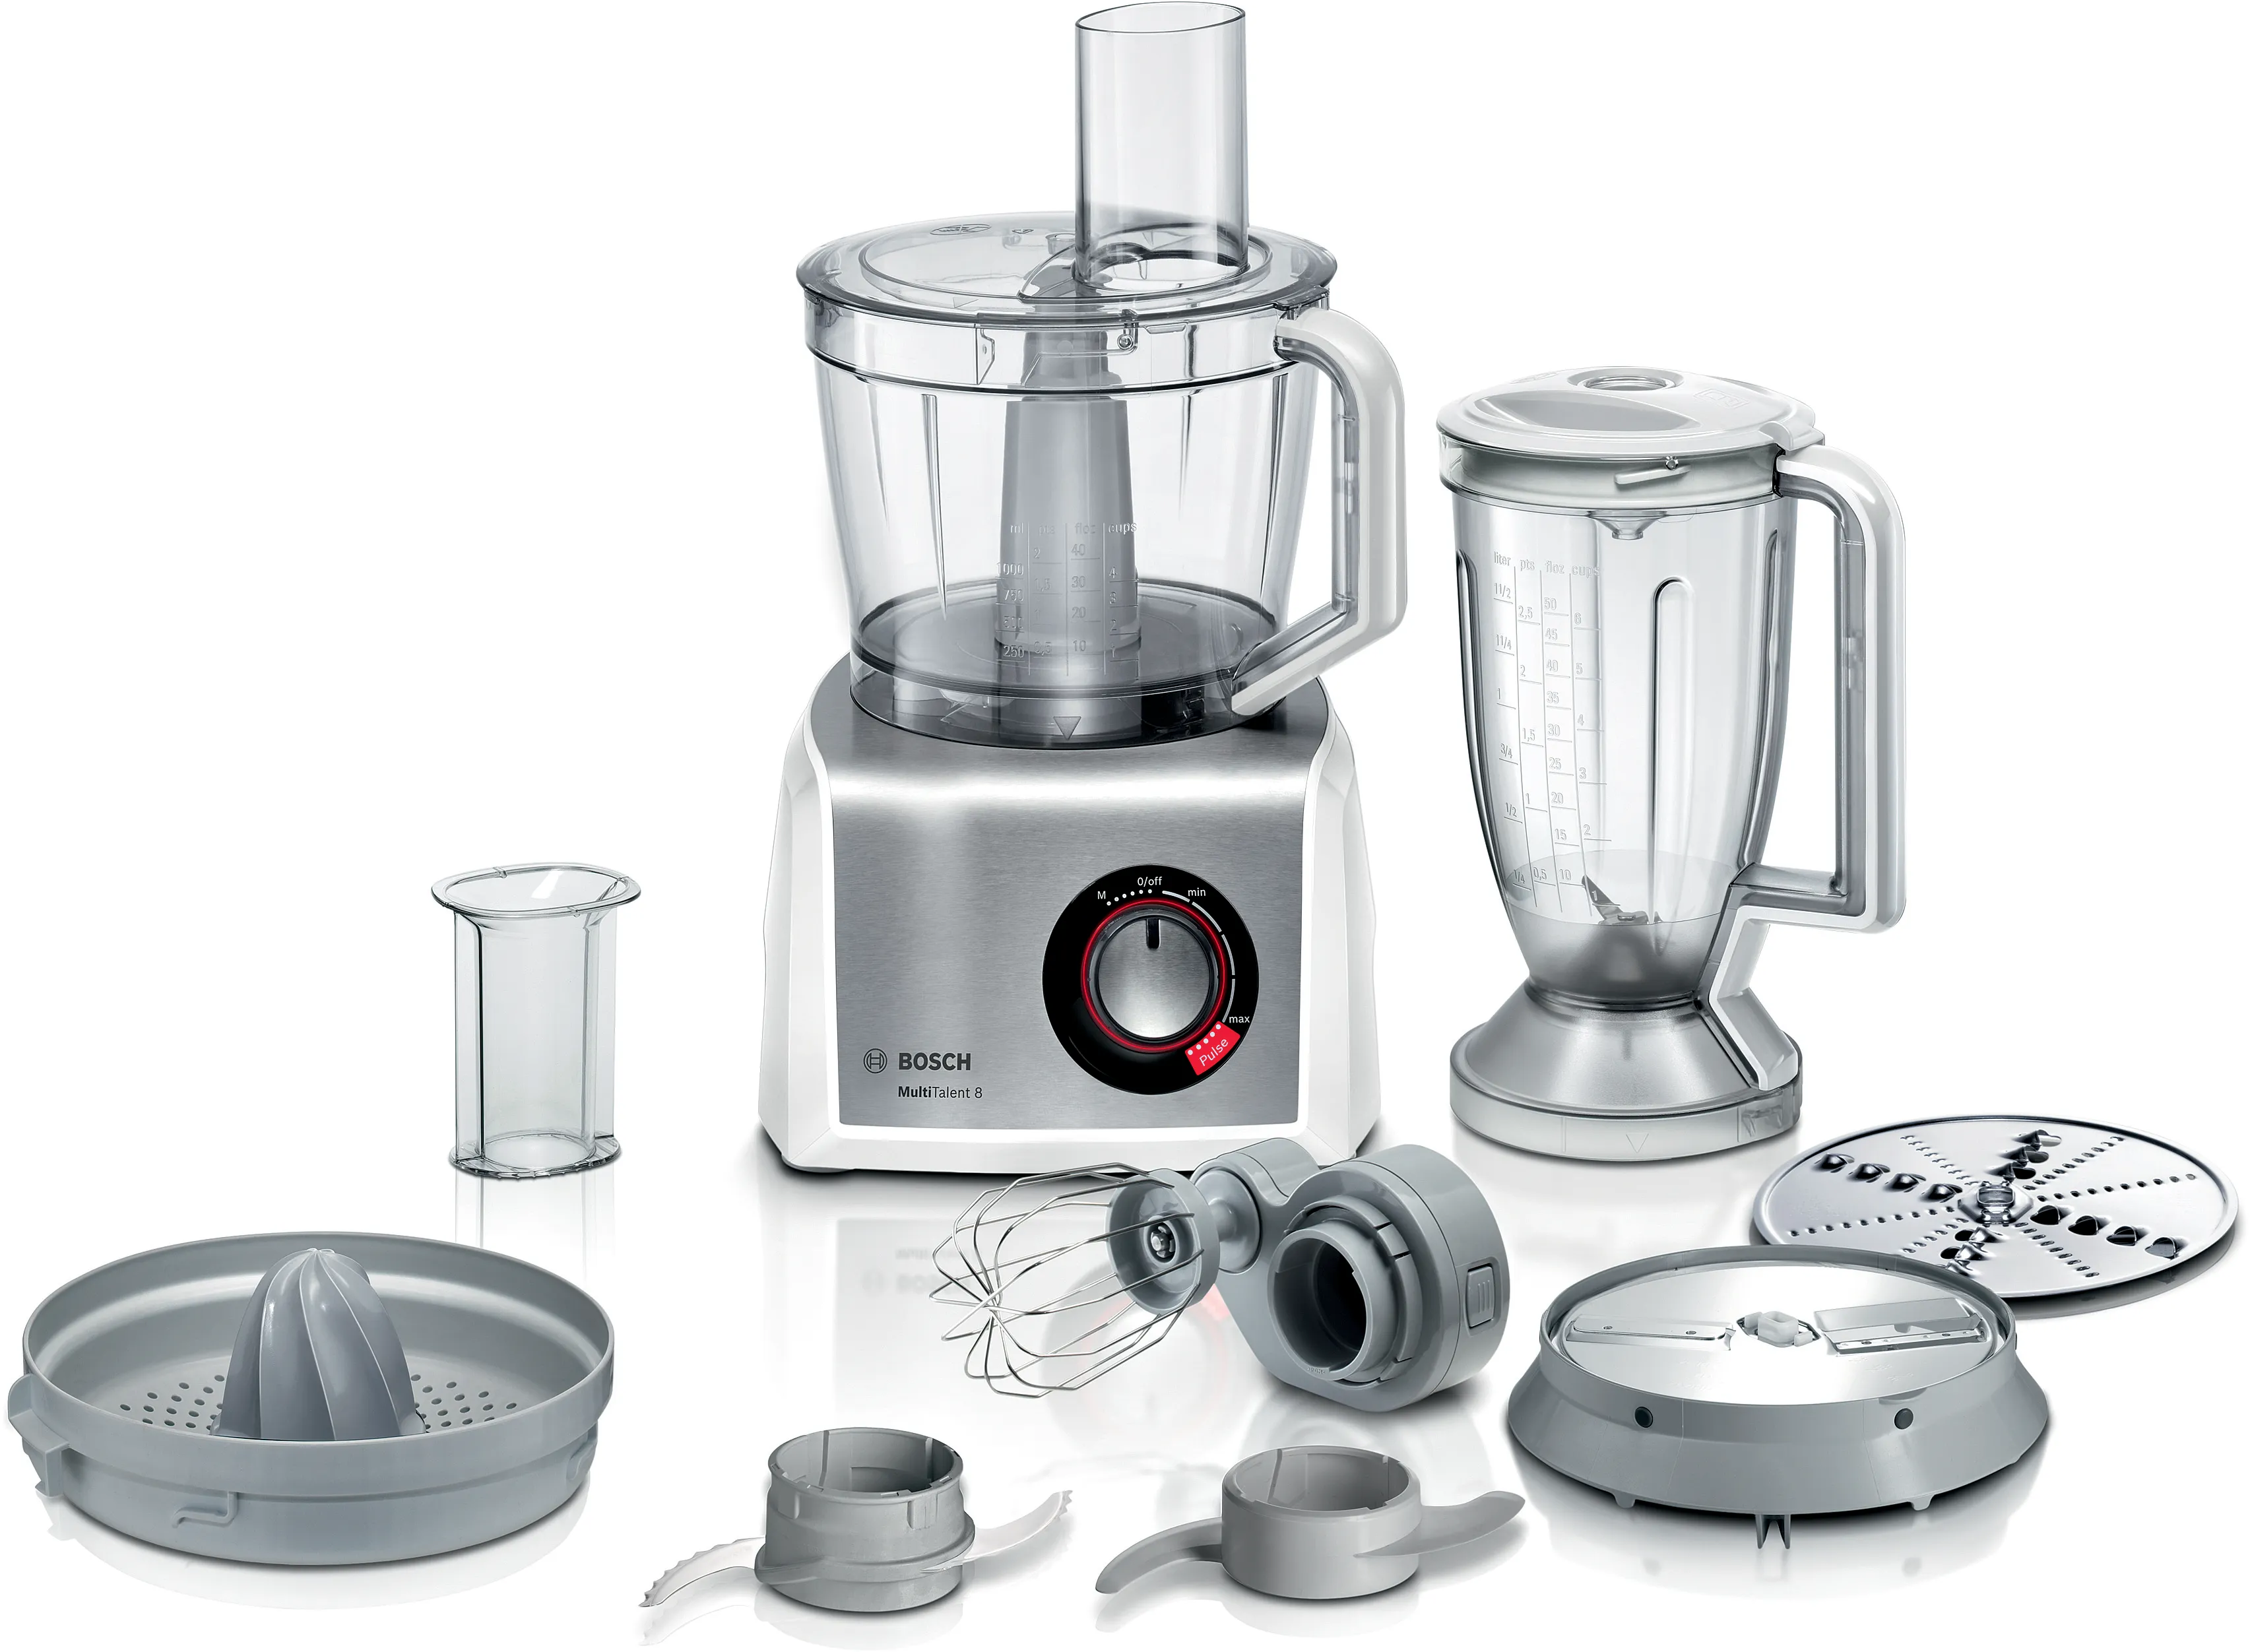 Food processor MultiTalent 8 1250 W White, Brushed stainless steel 